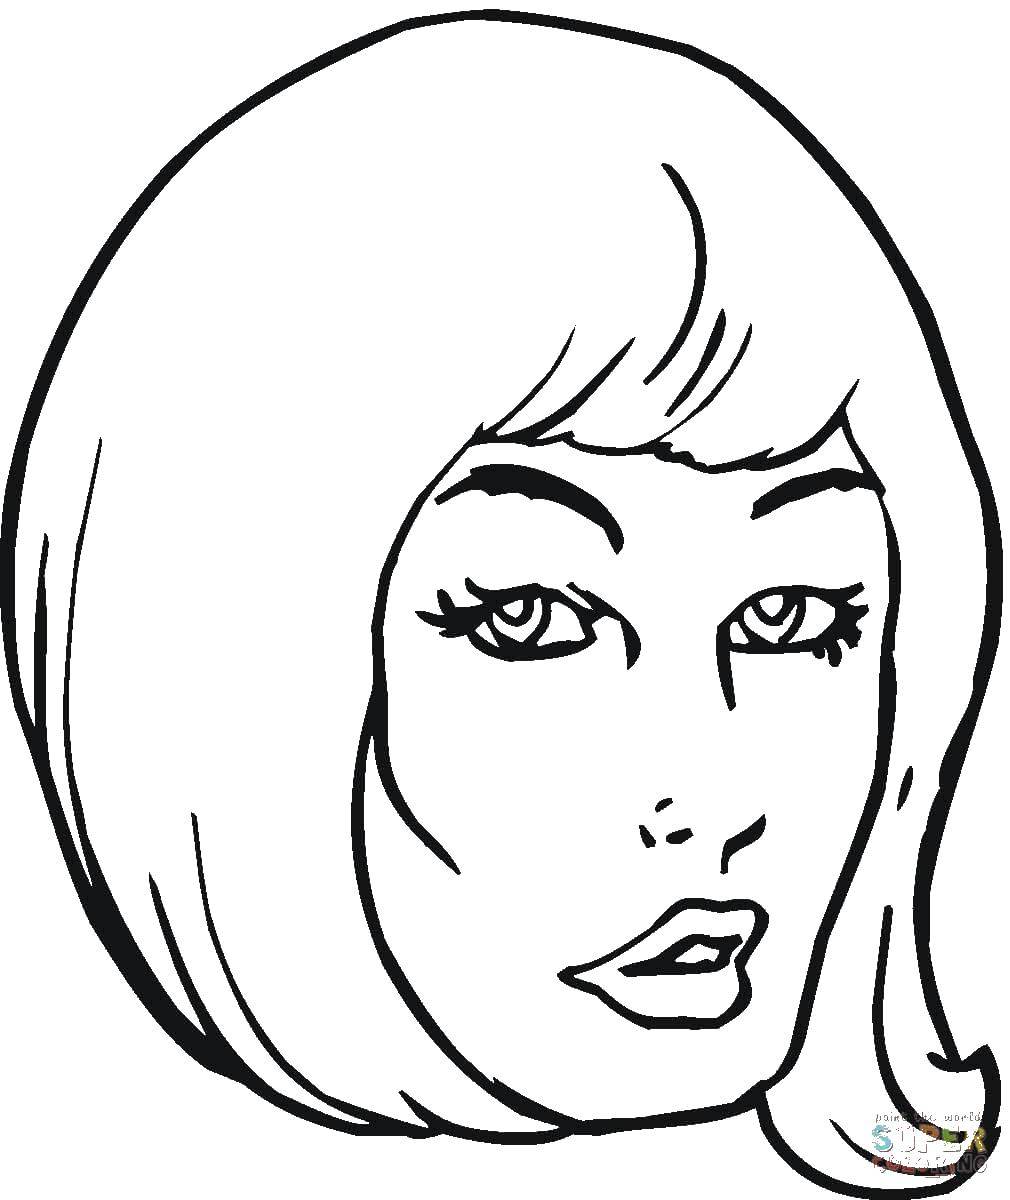 Coloring Portrait of a girl. Category girl. Tags:  girl, portrait, face.